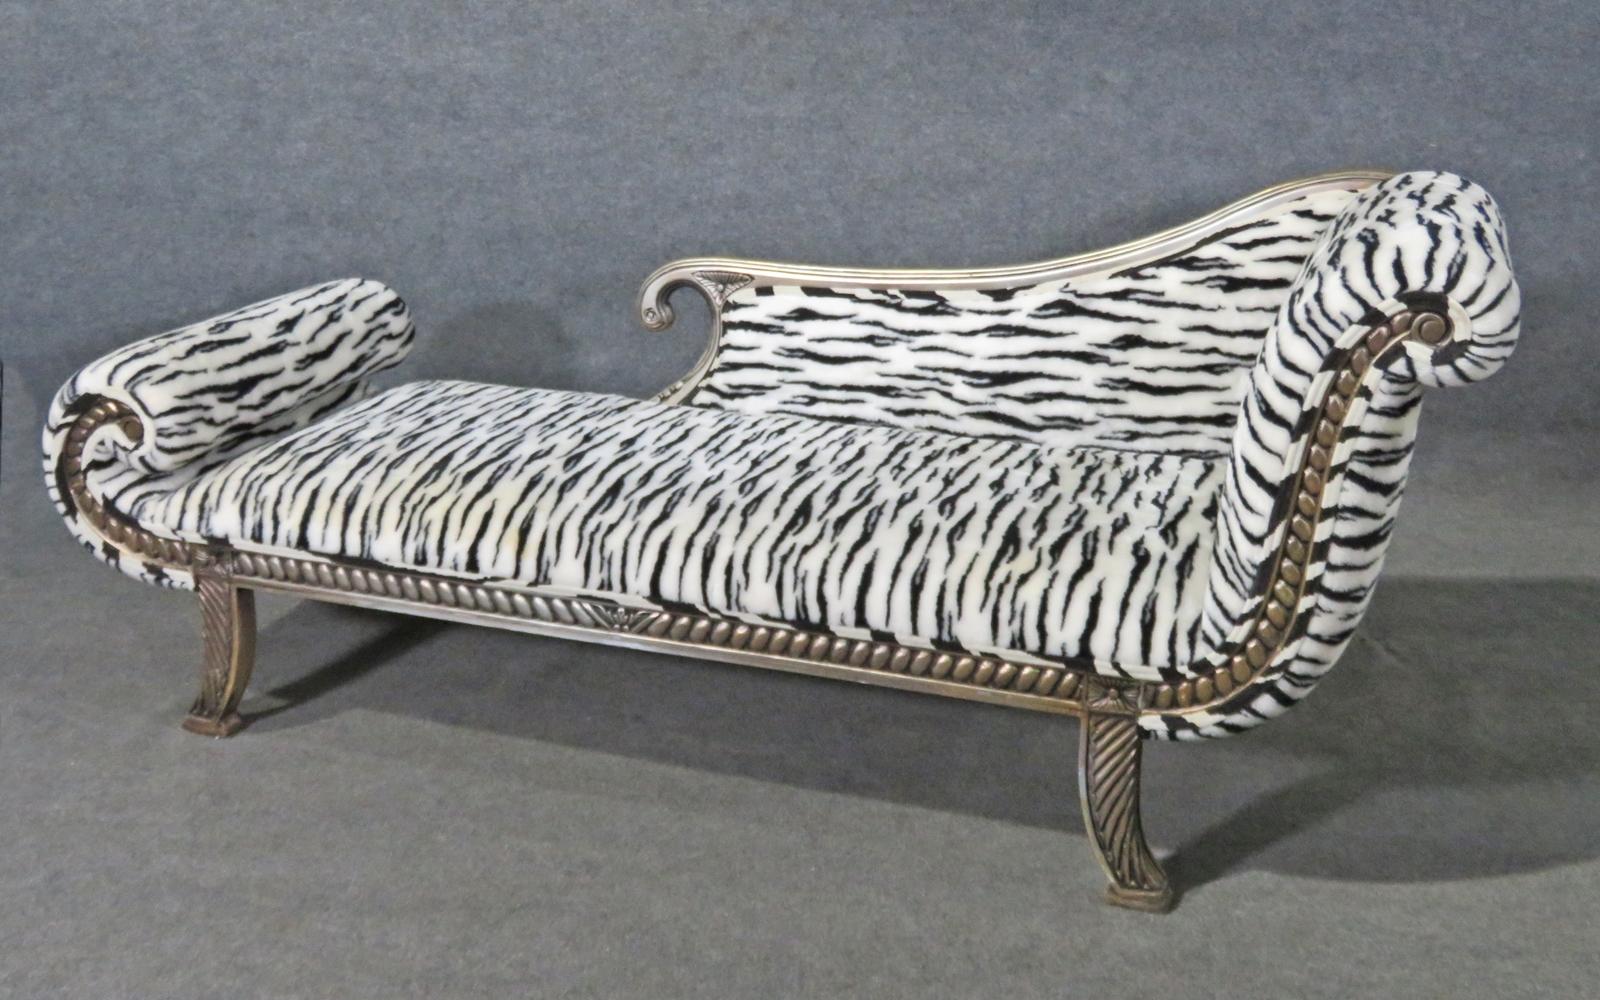 This is a very unique and eye-popping chaise or recamier. The piece is designed in a stylized English Regency style. The upholstery is a furry zerba print and in decent condition. The dimensions are 35 1/2